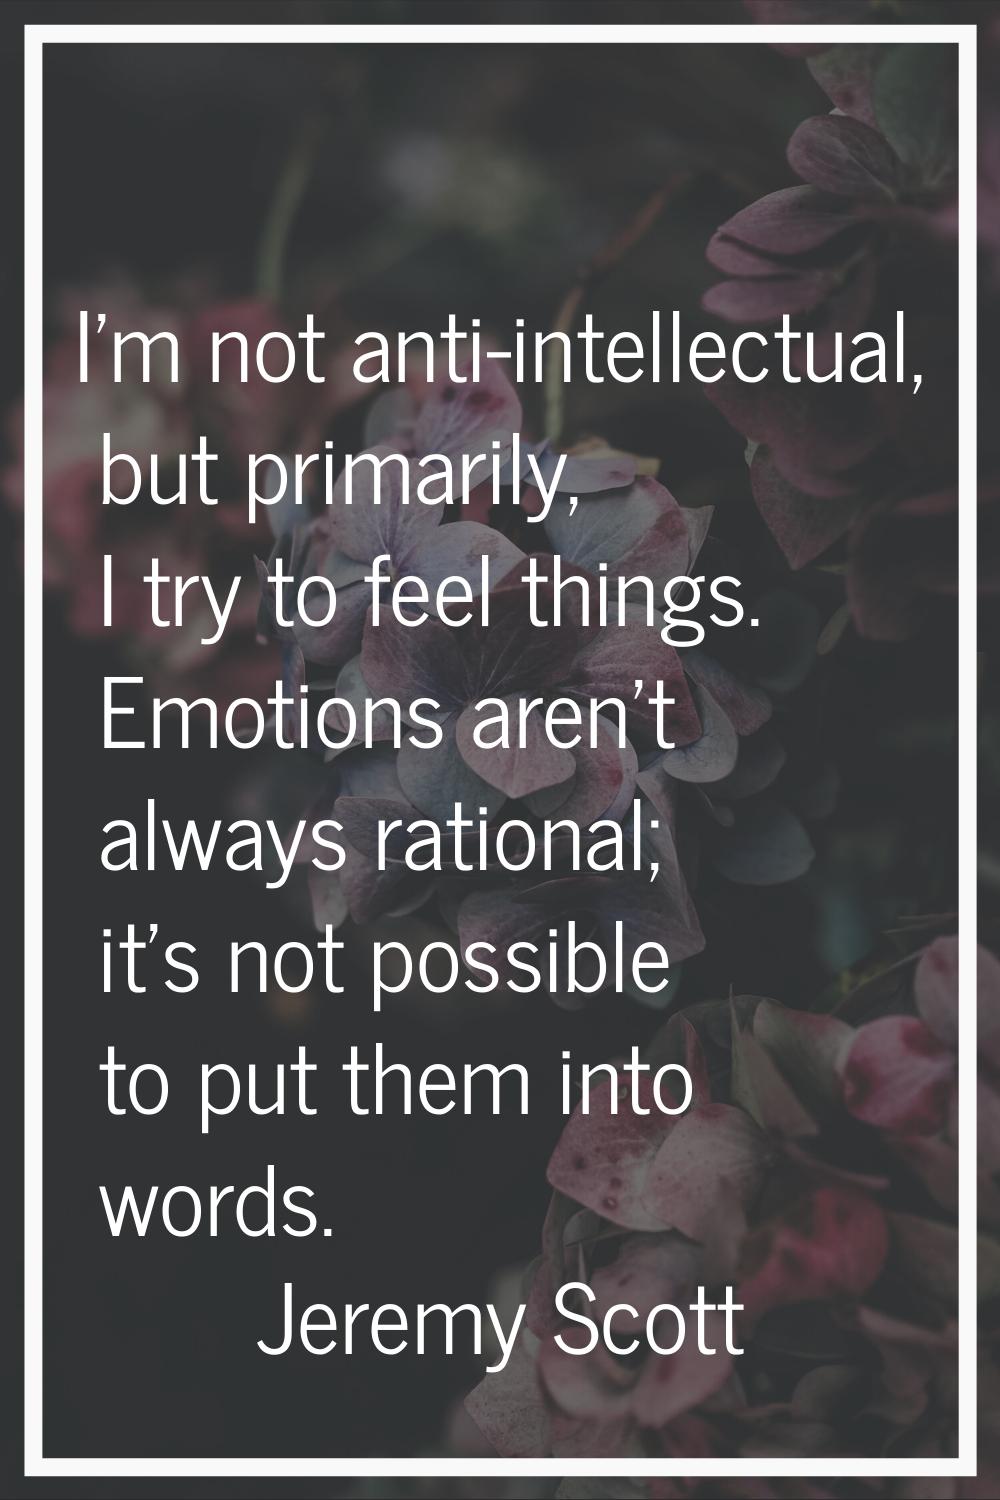 I'm not anti-intellectual, but primarily, I try to feel things. Emotions aren't always rational; it